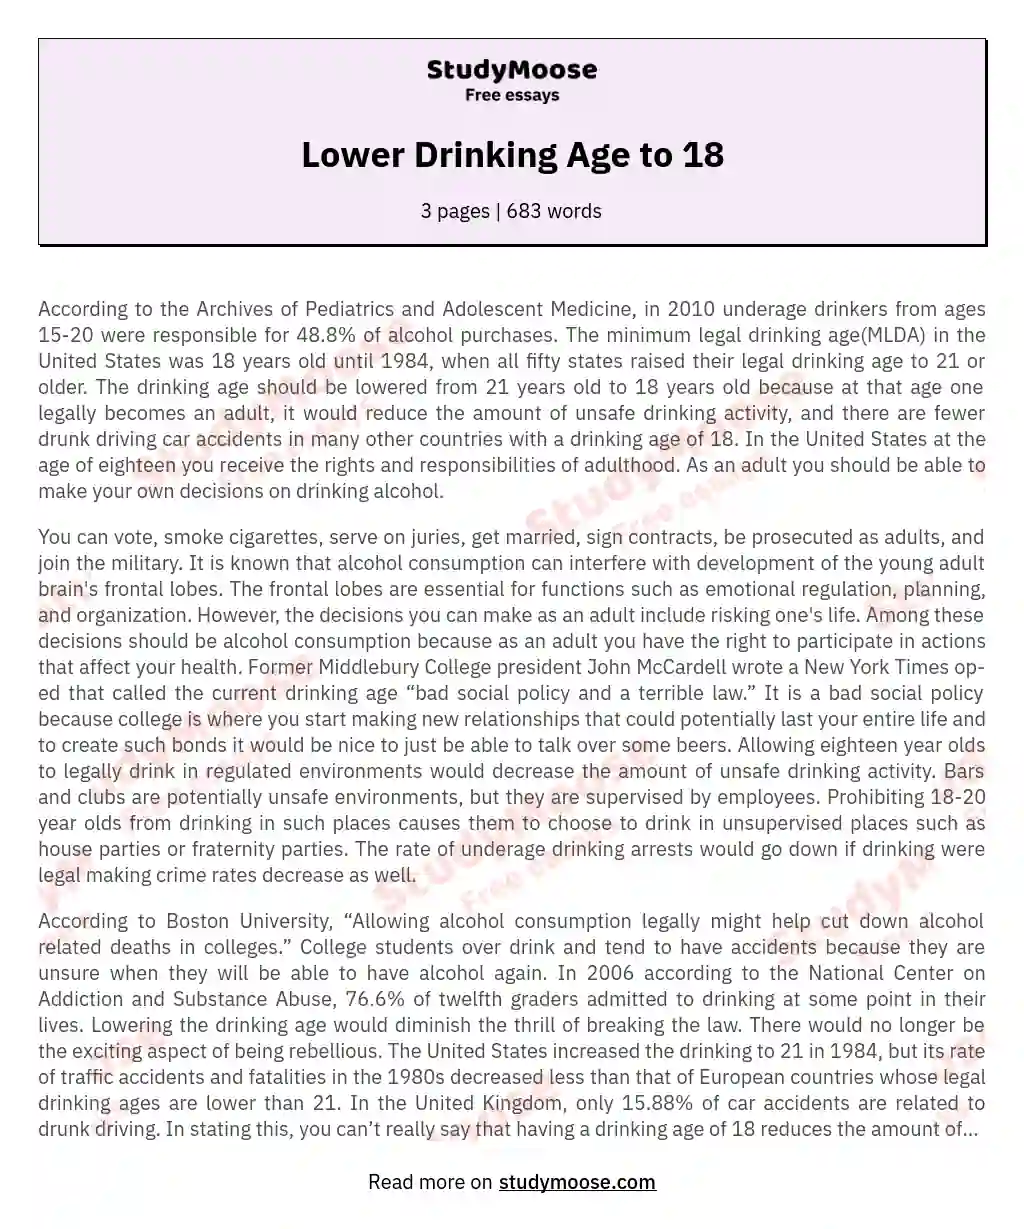 Lower Drinking Age to 18 essay